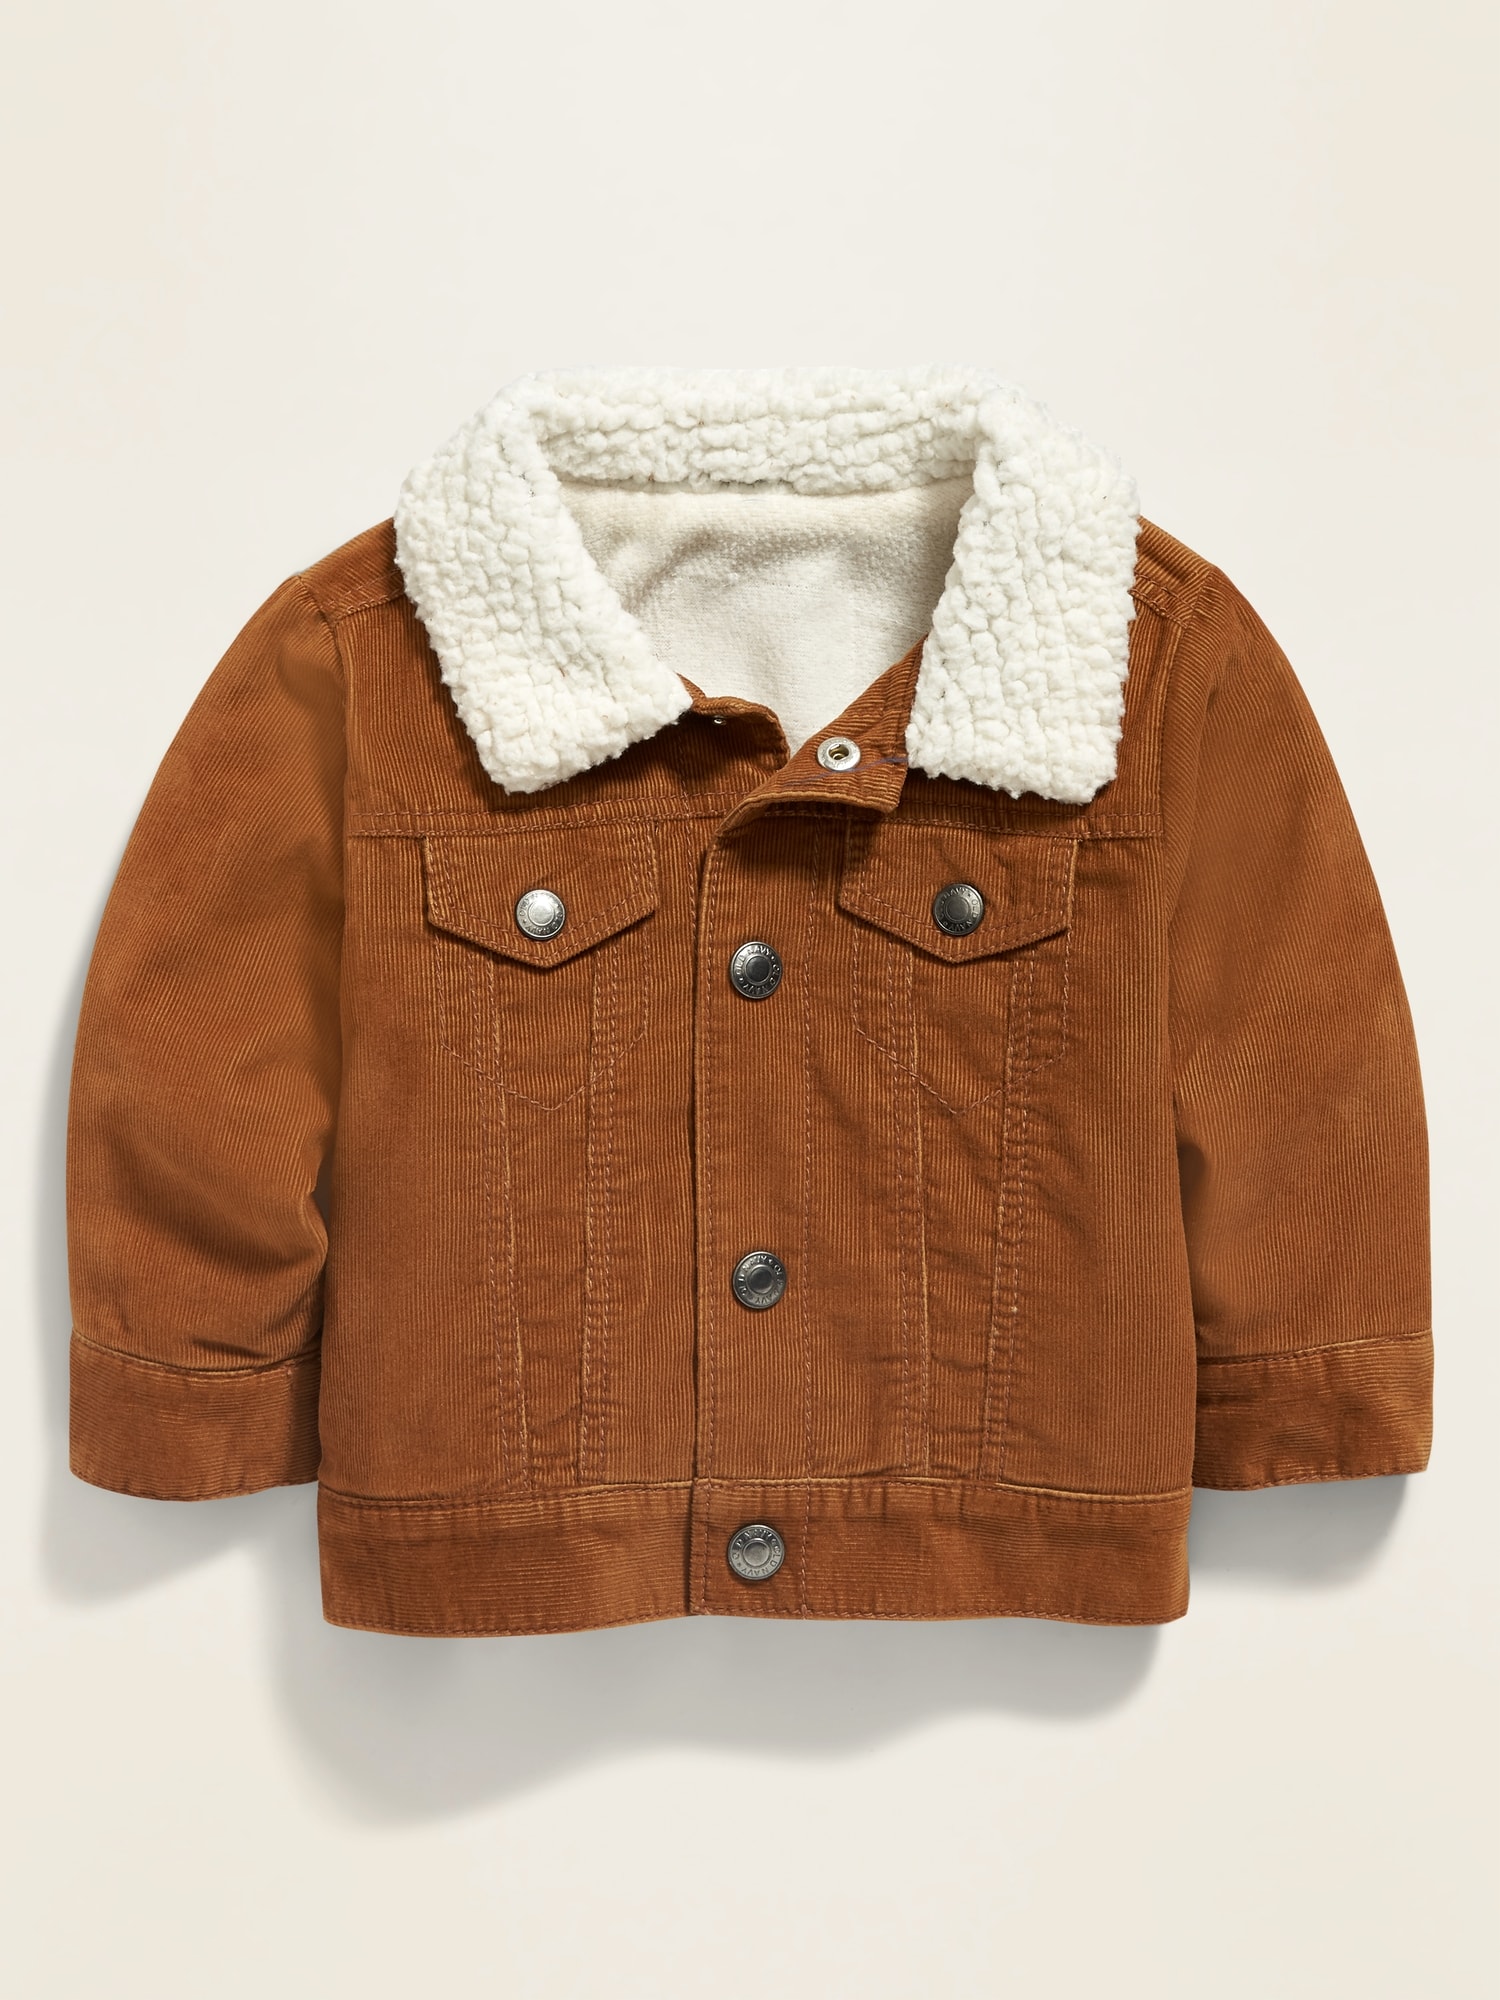 Unisex Sherpa-Lined Corduroy Trucker Jacket for Baby